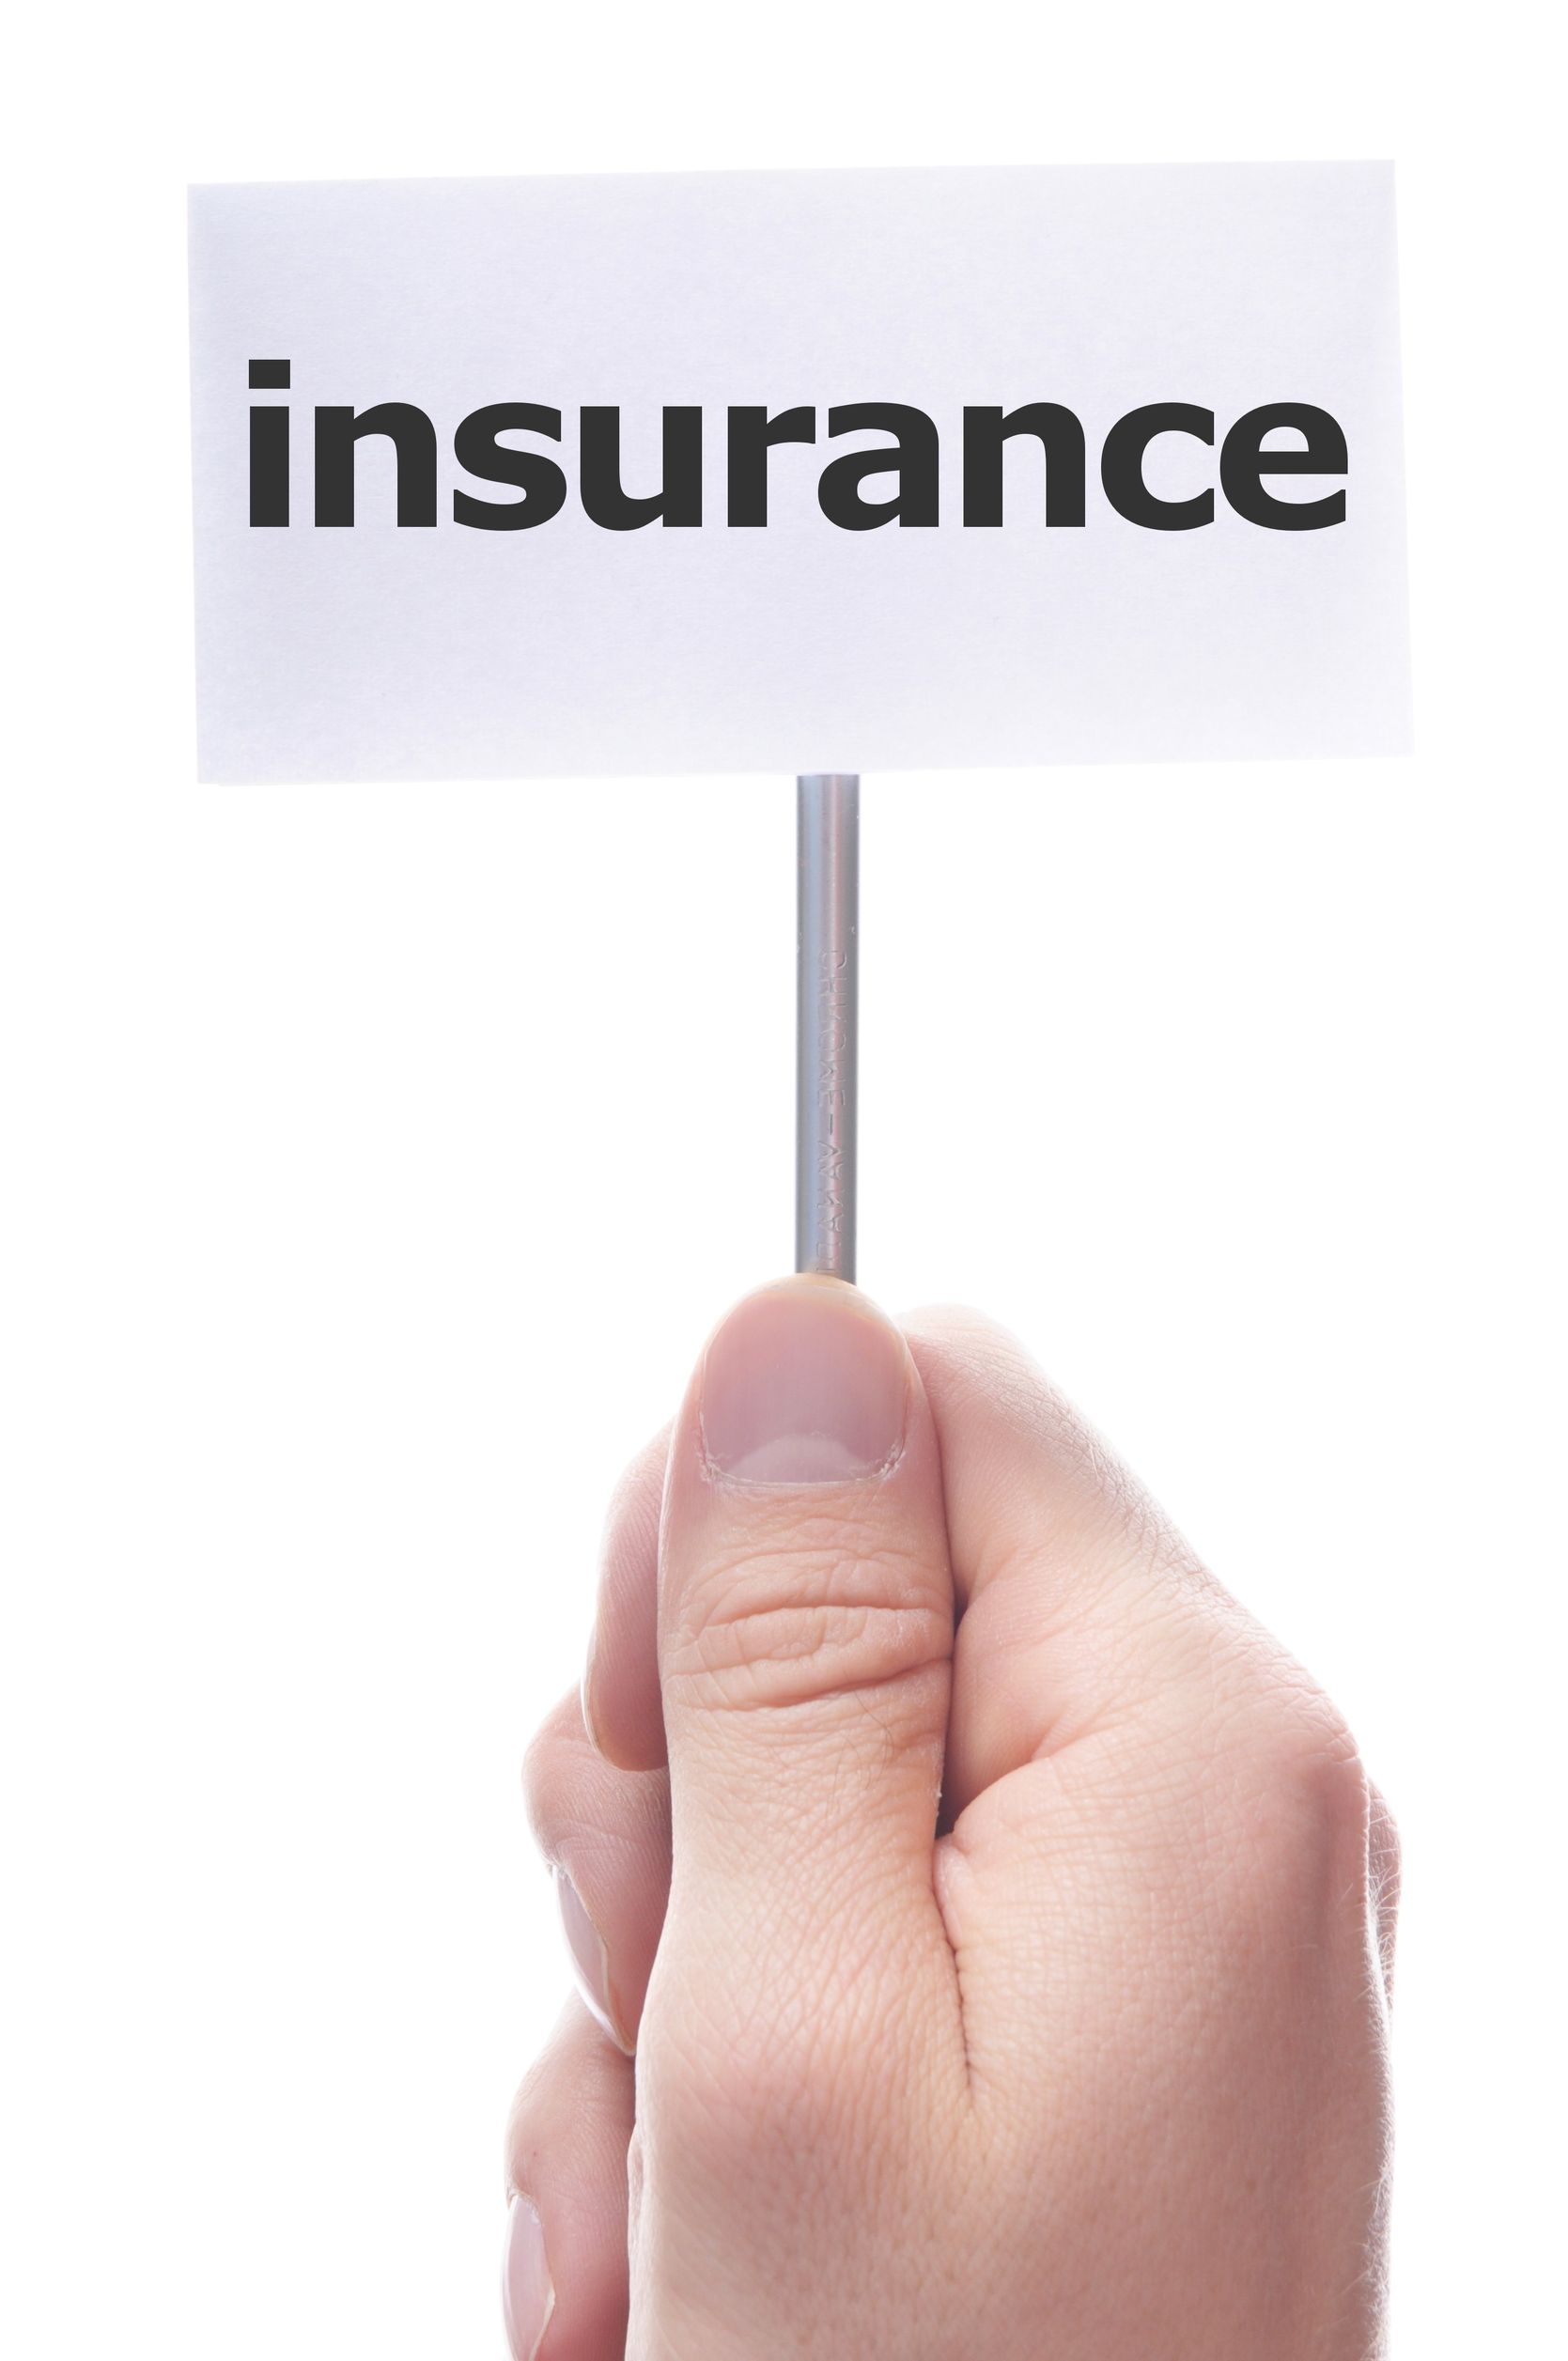 Getting Homeowners Insurance in Naples, FL